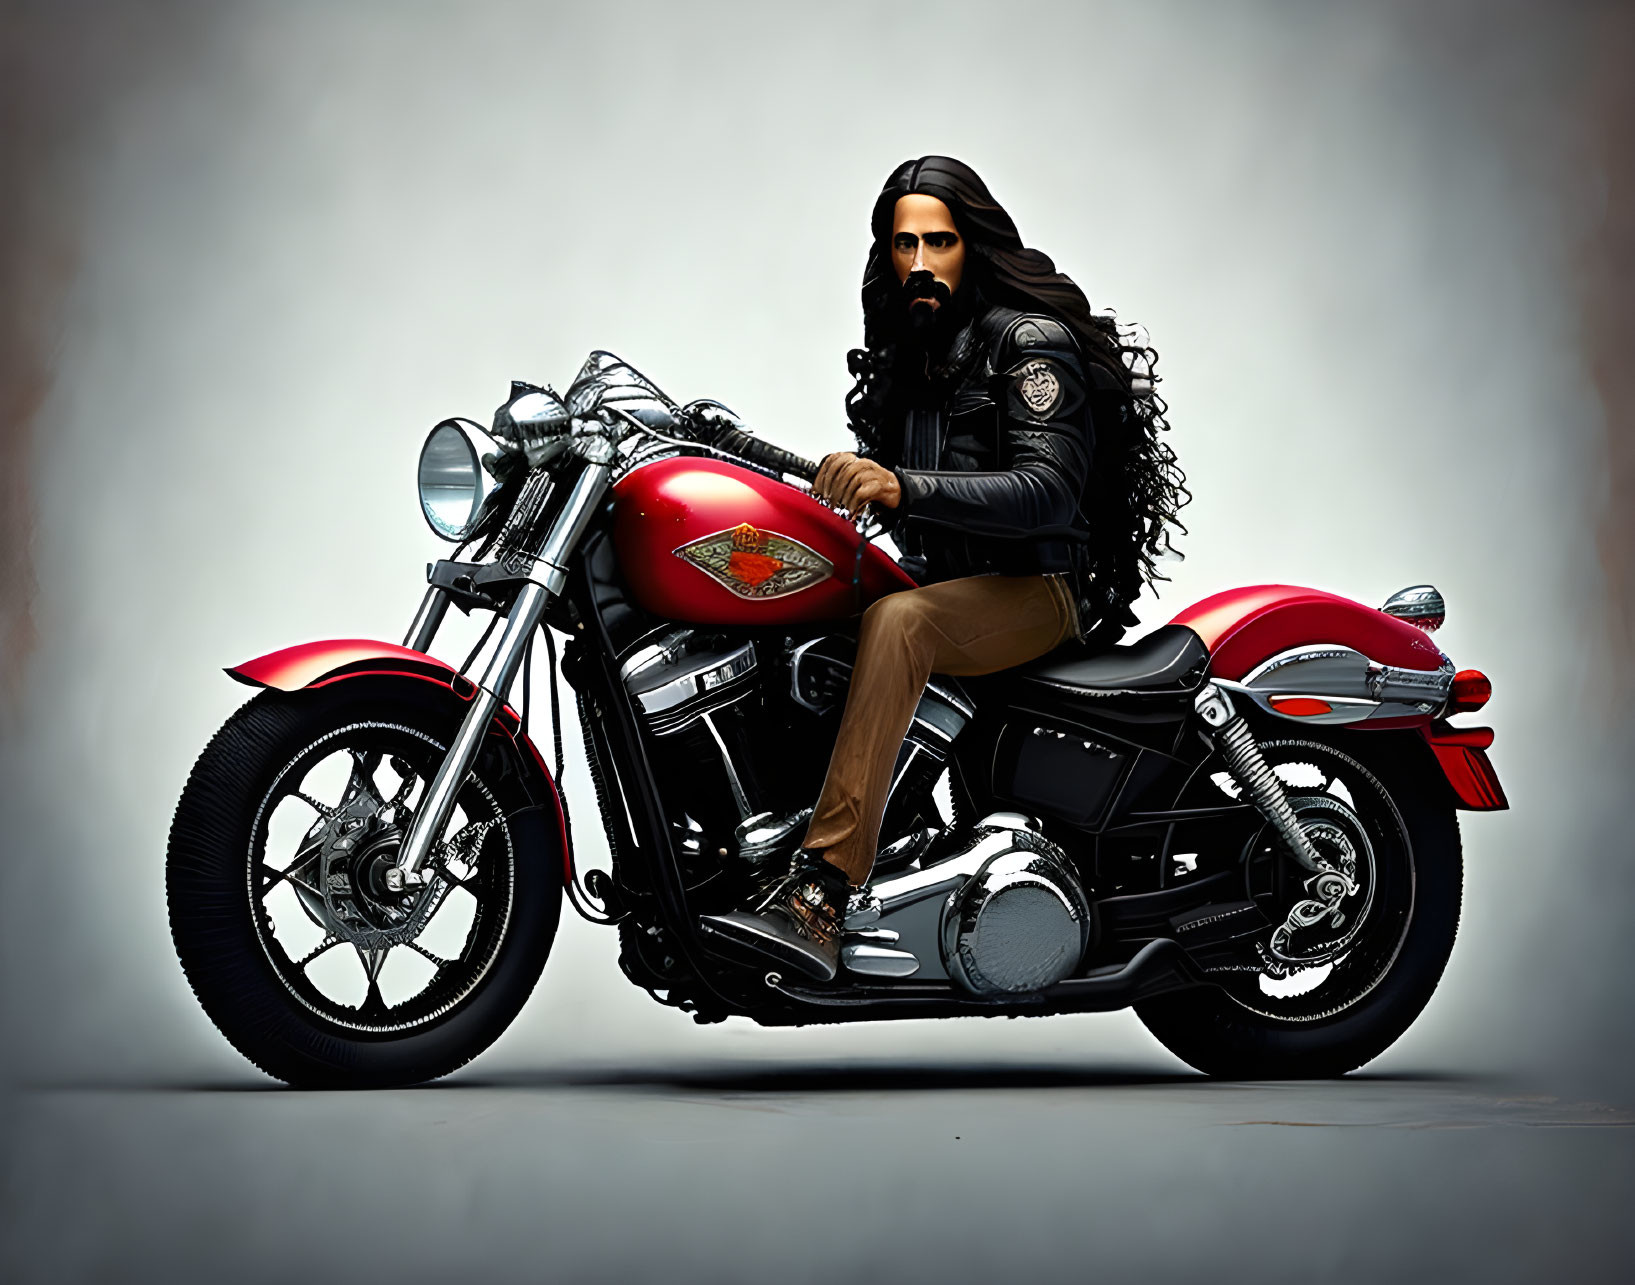 Bearded man in black leather jacket on red motorcycle against grey backdrop